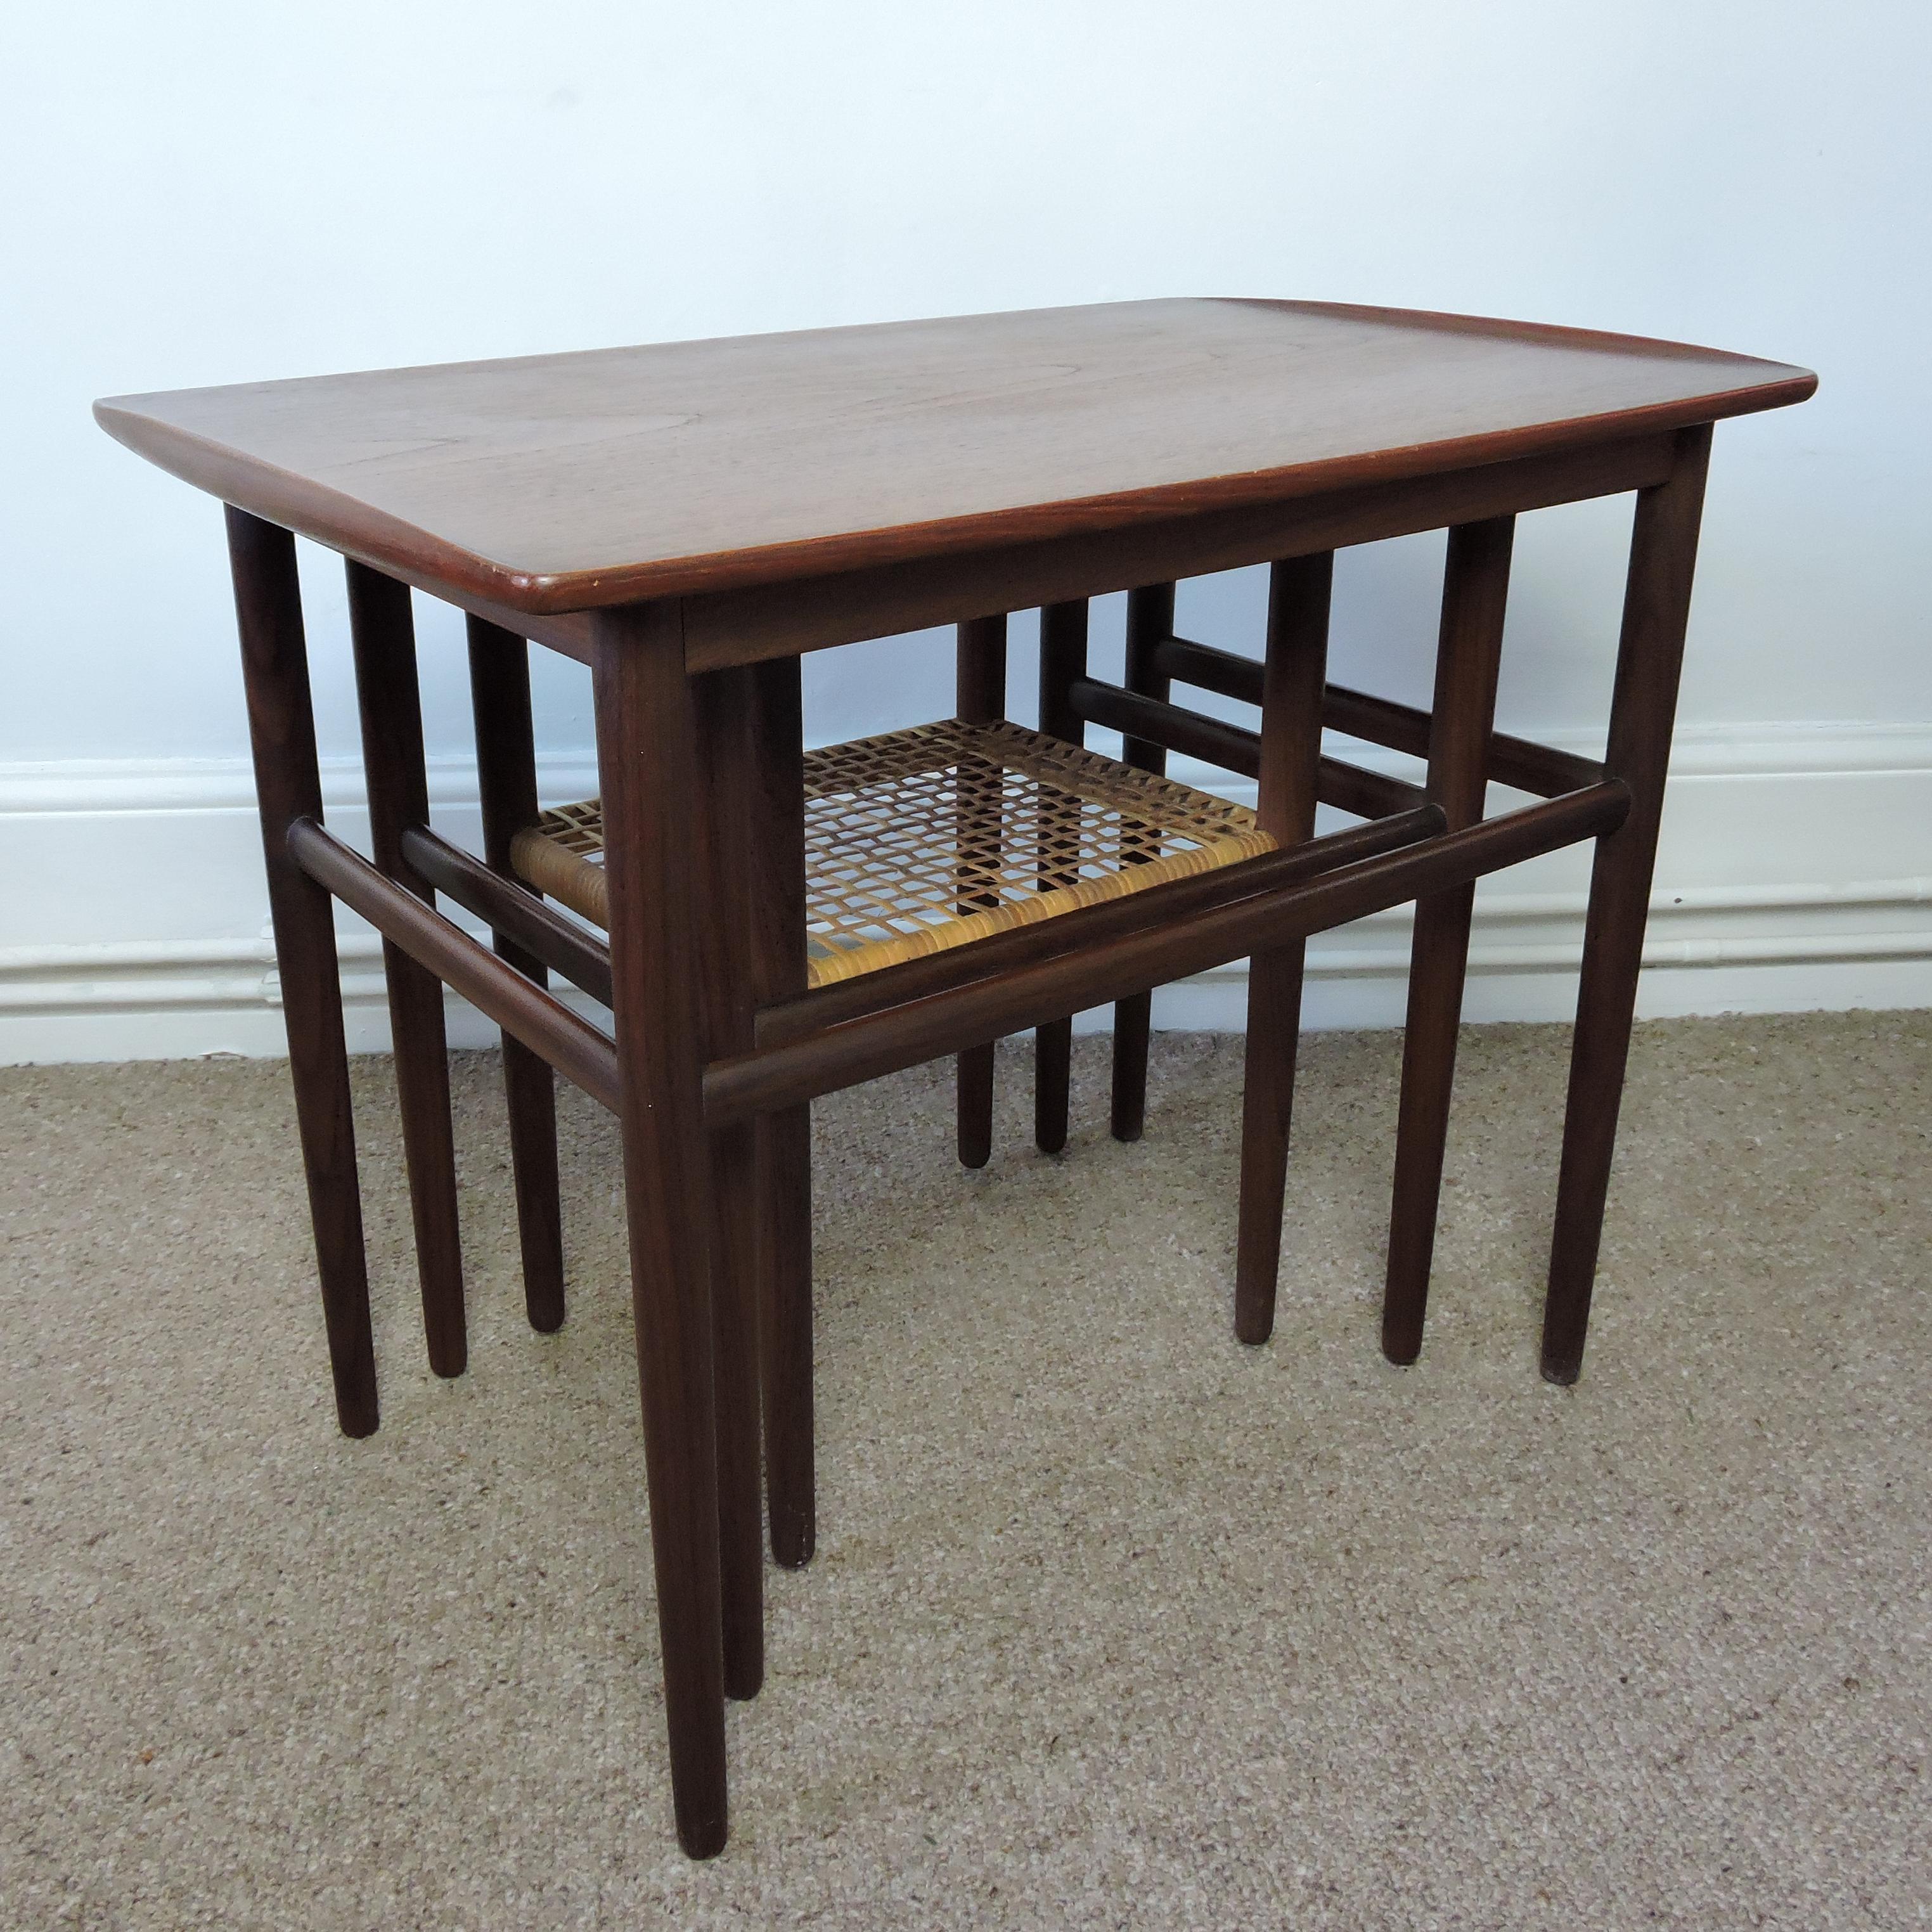 Mid-20th Century Midcentury Danish Teak and Cane Nesting Tables, 1950s For Sale